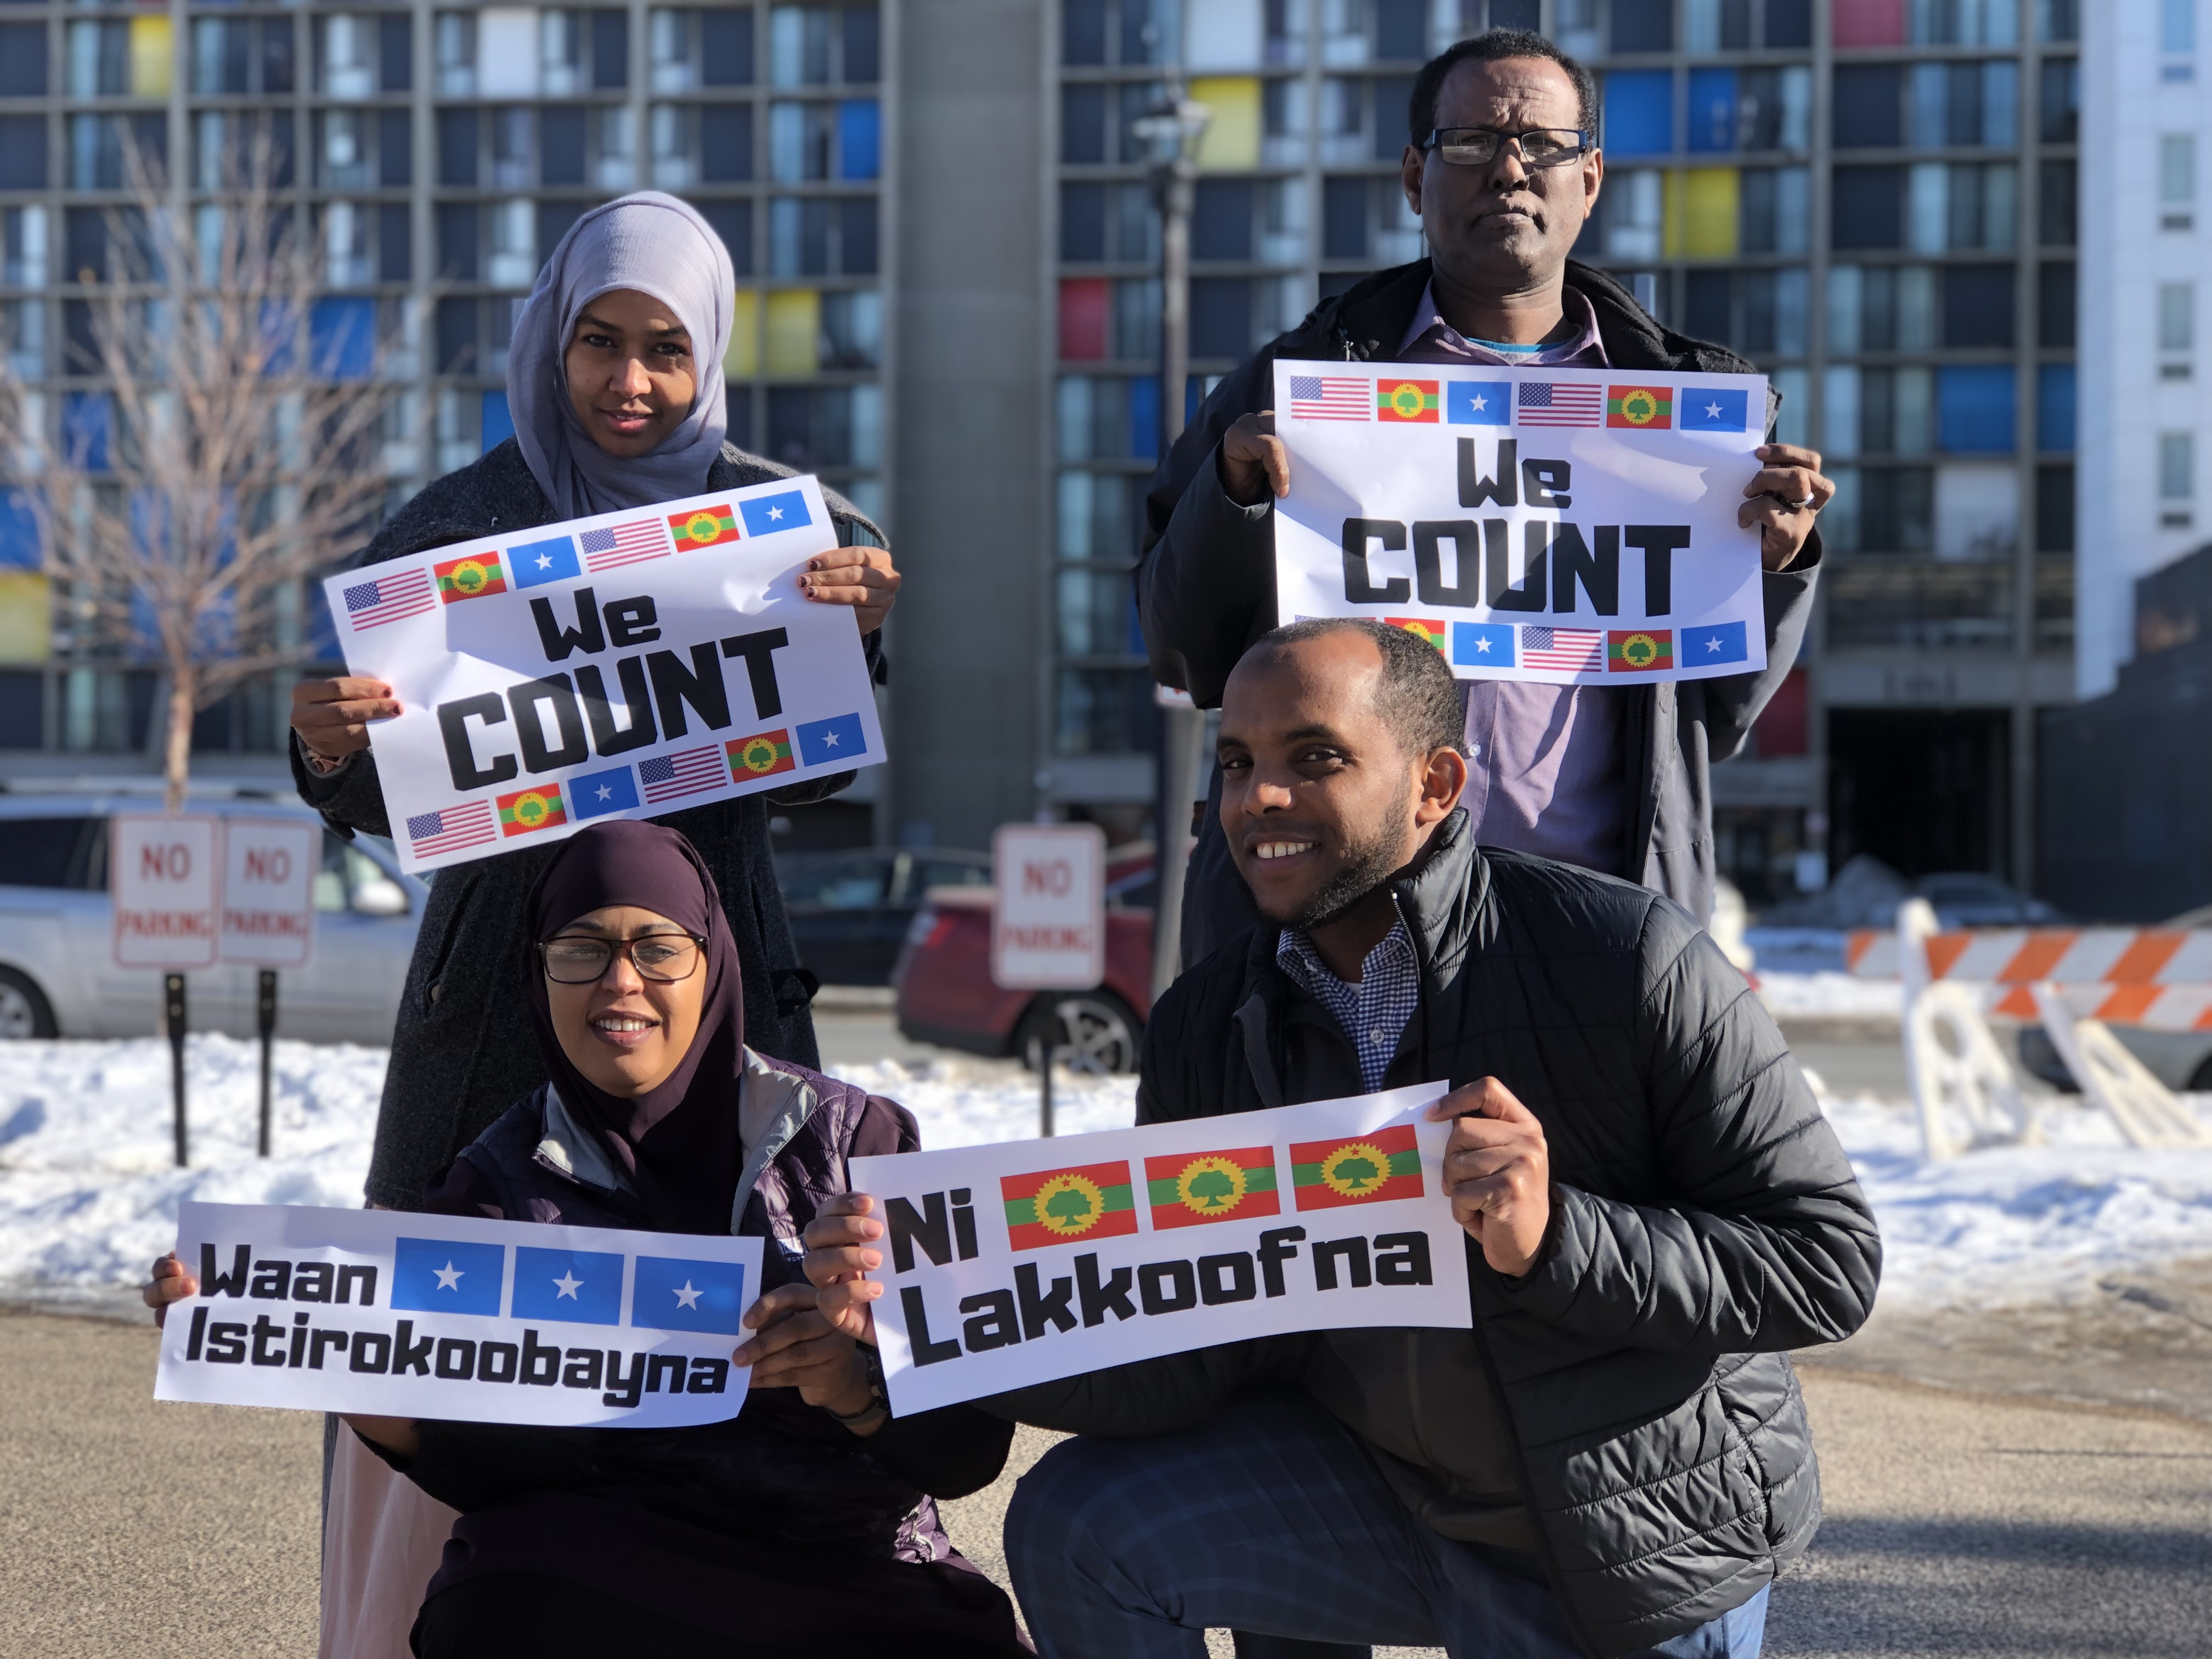 Cedar Riverside Leaders holding 'We Count' signs in English, Somali, and Oromo